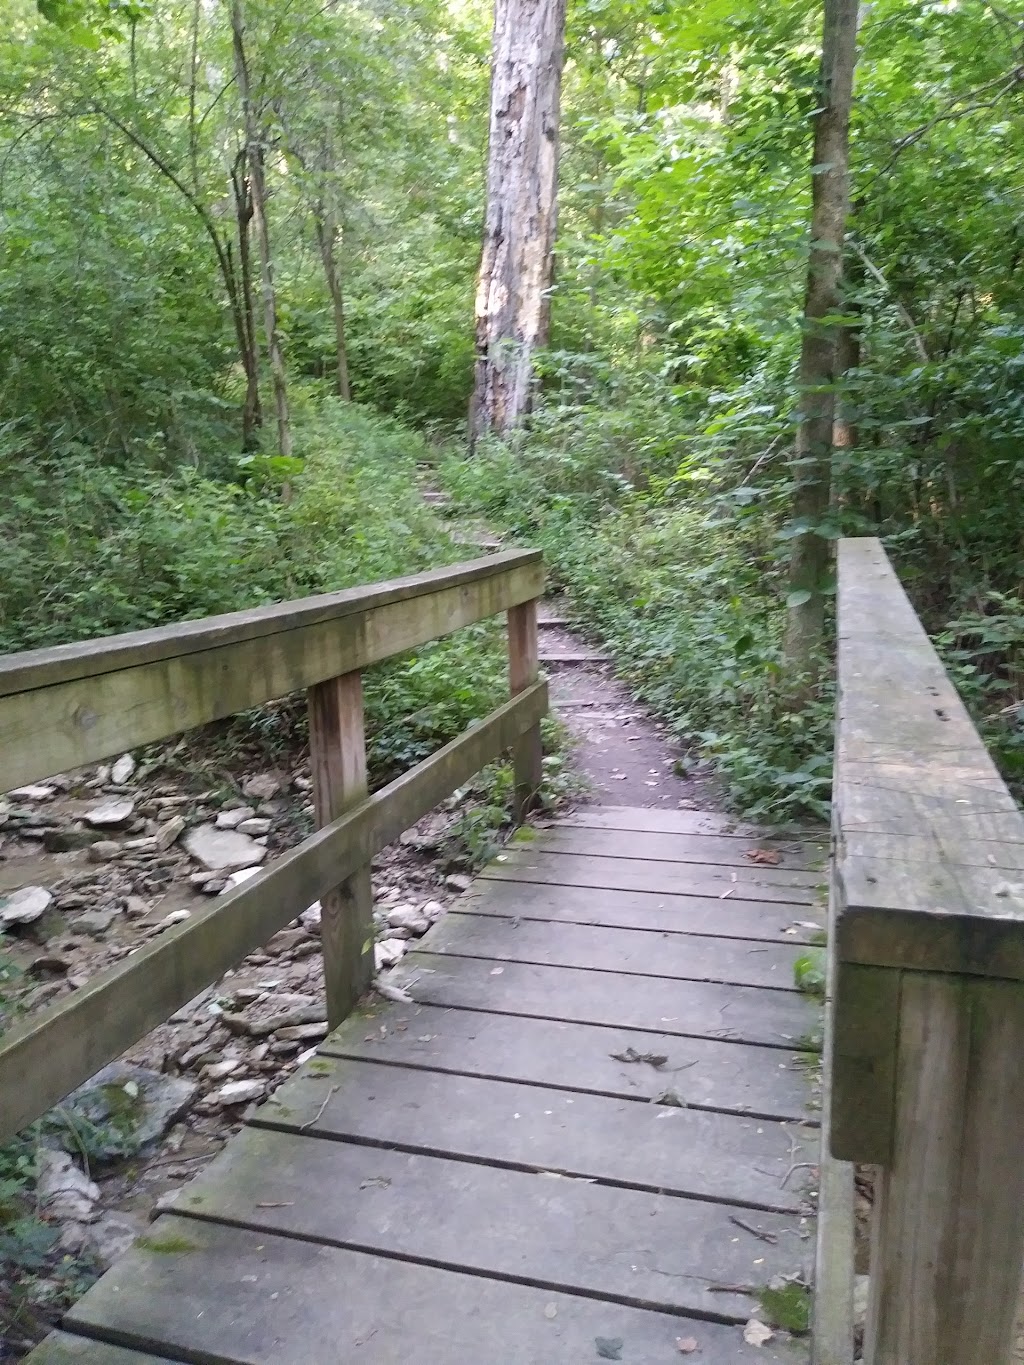 The Narrows Reserve Nature Center | 2575 Indian Ripple Rd, Xenia, OH 45385, USA | Phone: (937) 429-9590